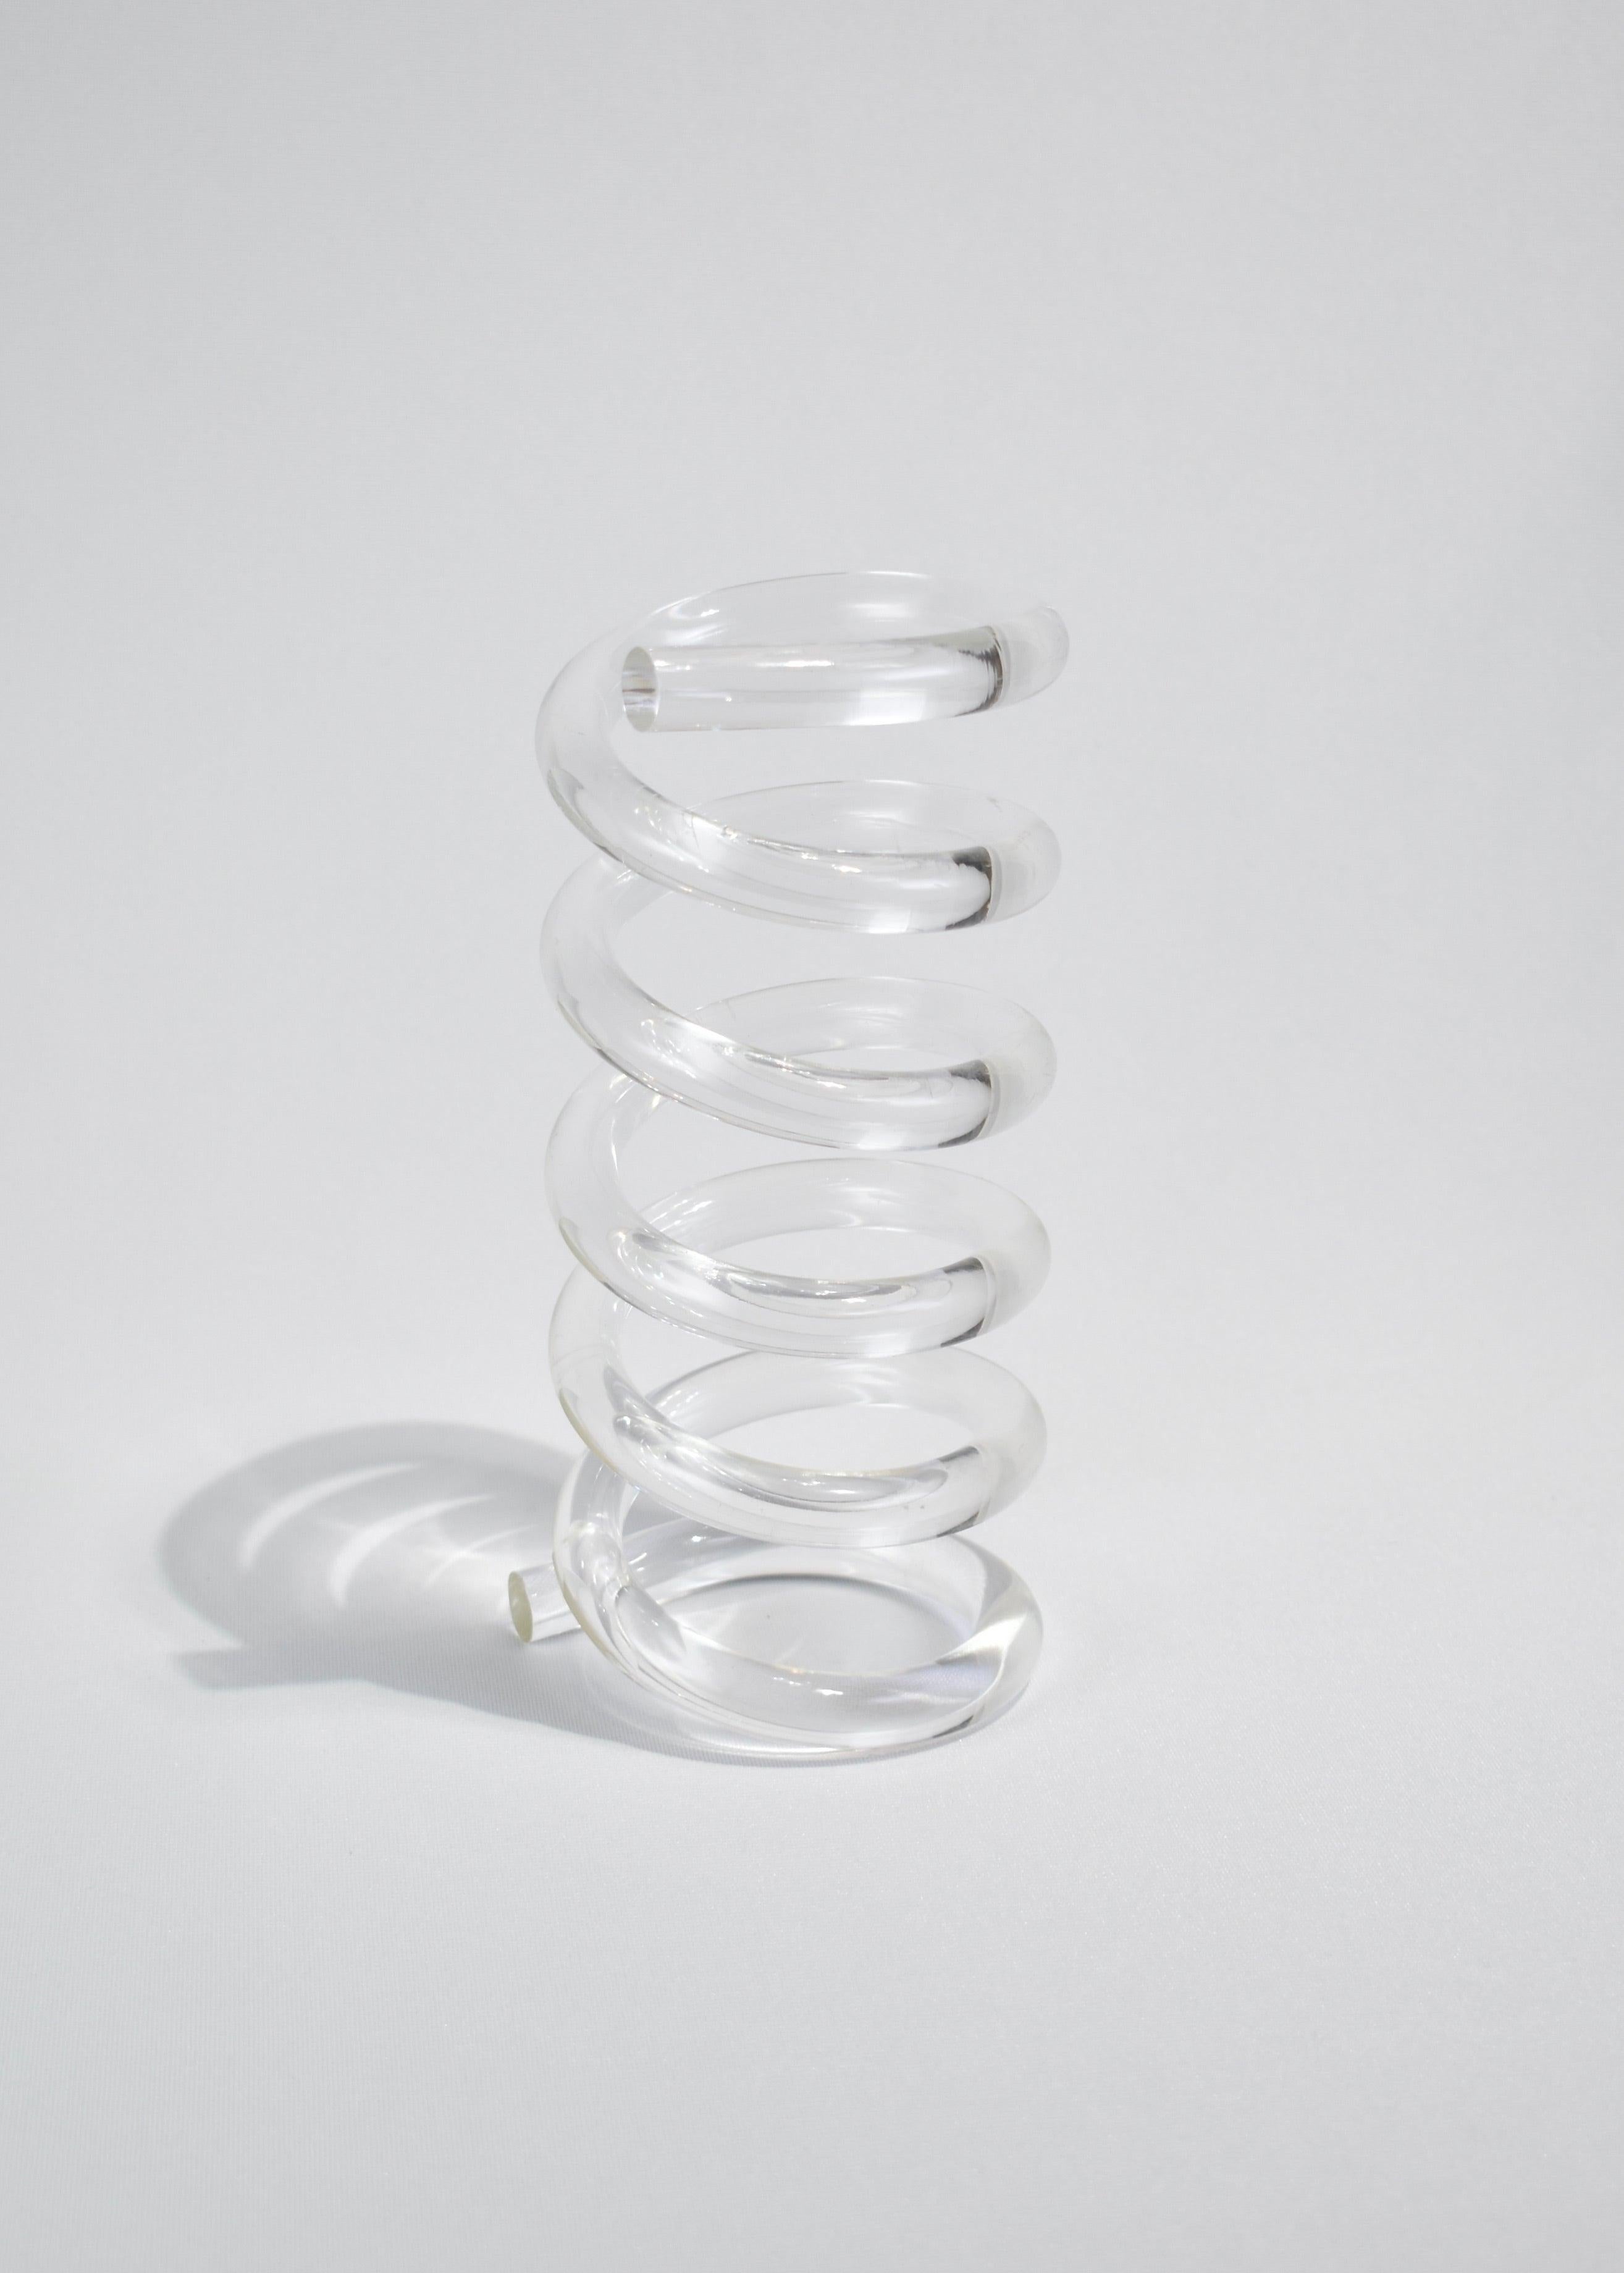 Beautiful vintage lucite spiral sculpture by Dorothy Thorpe. May be used as an organizer for letters or displayed on its own as a sculptural piece.